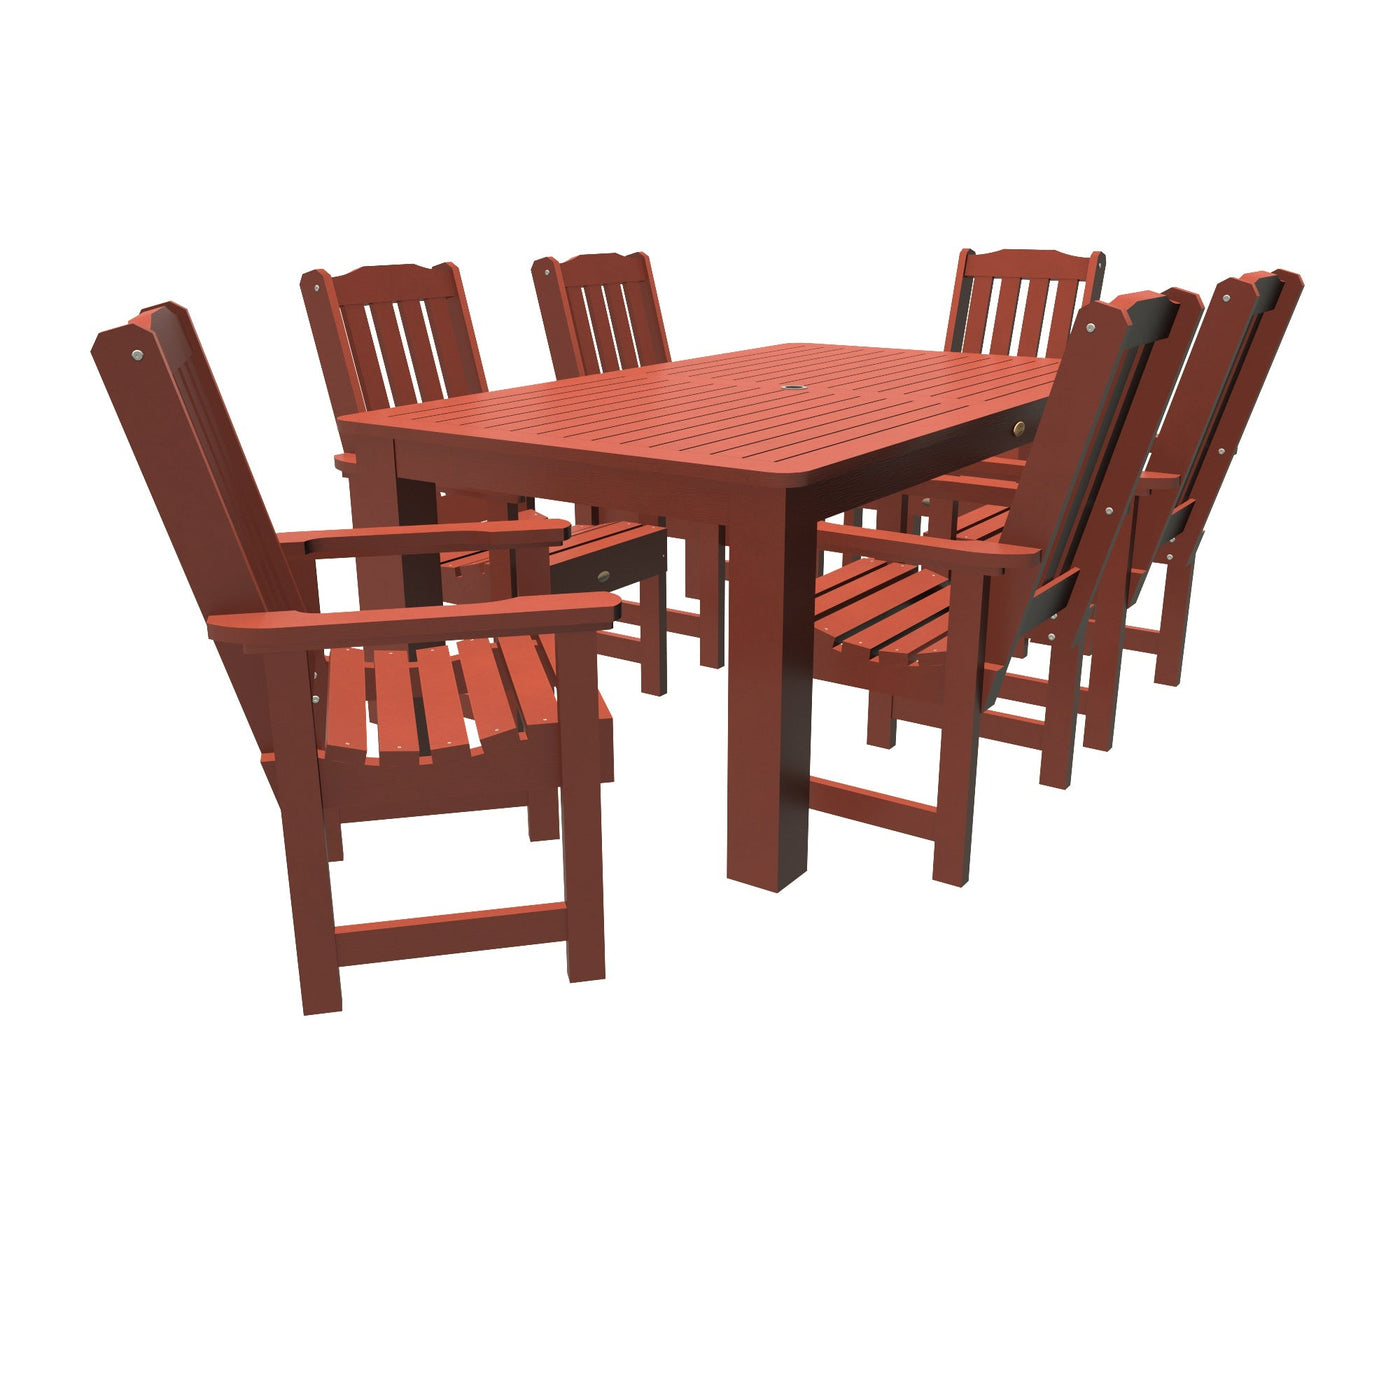 Lehigh 7pc Rectangular Outdoor Dining Set 42in x 72in - Dining Height Dining Highwood USA Rustic Red 